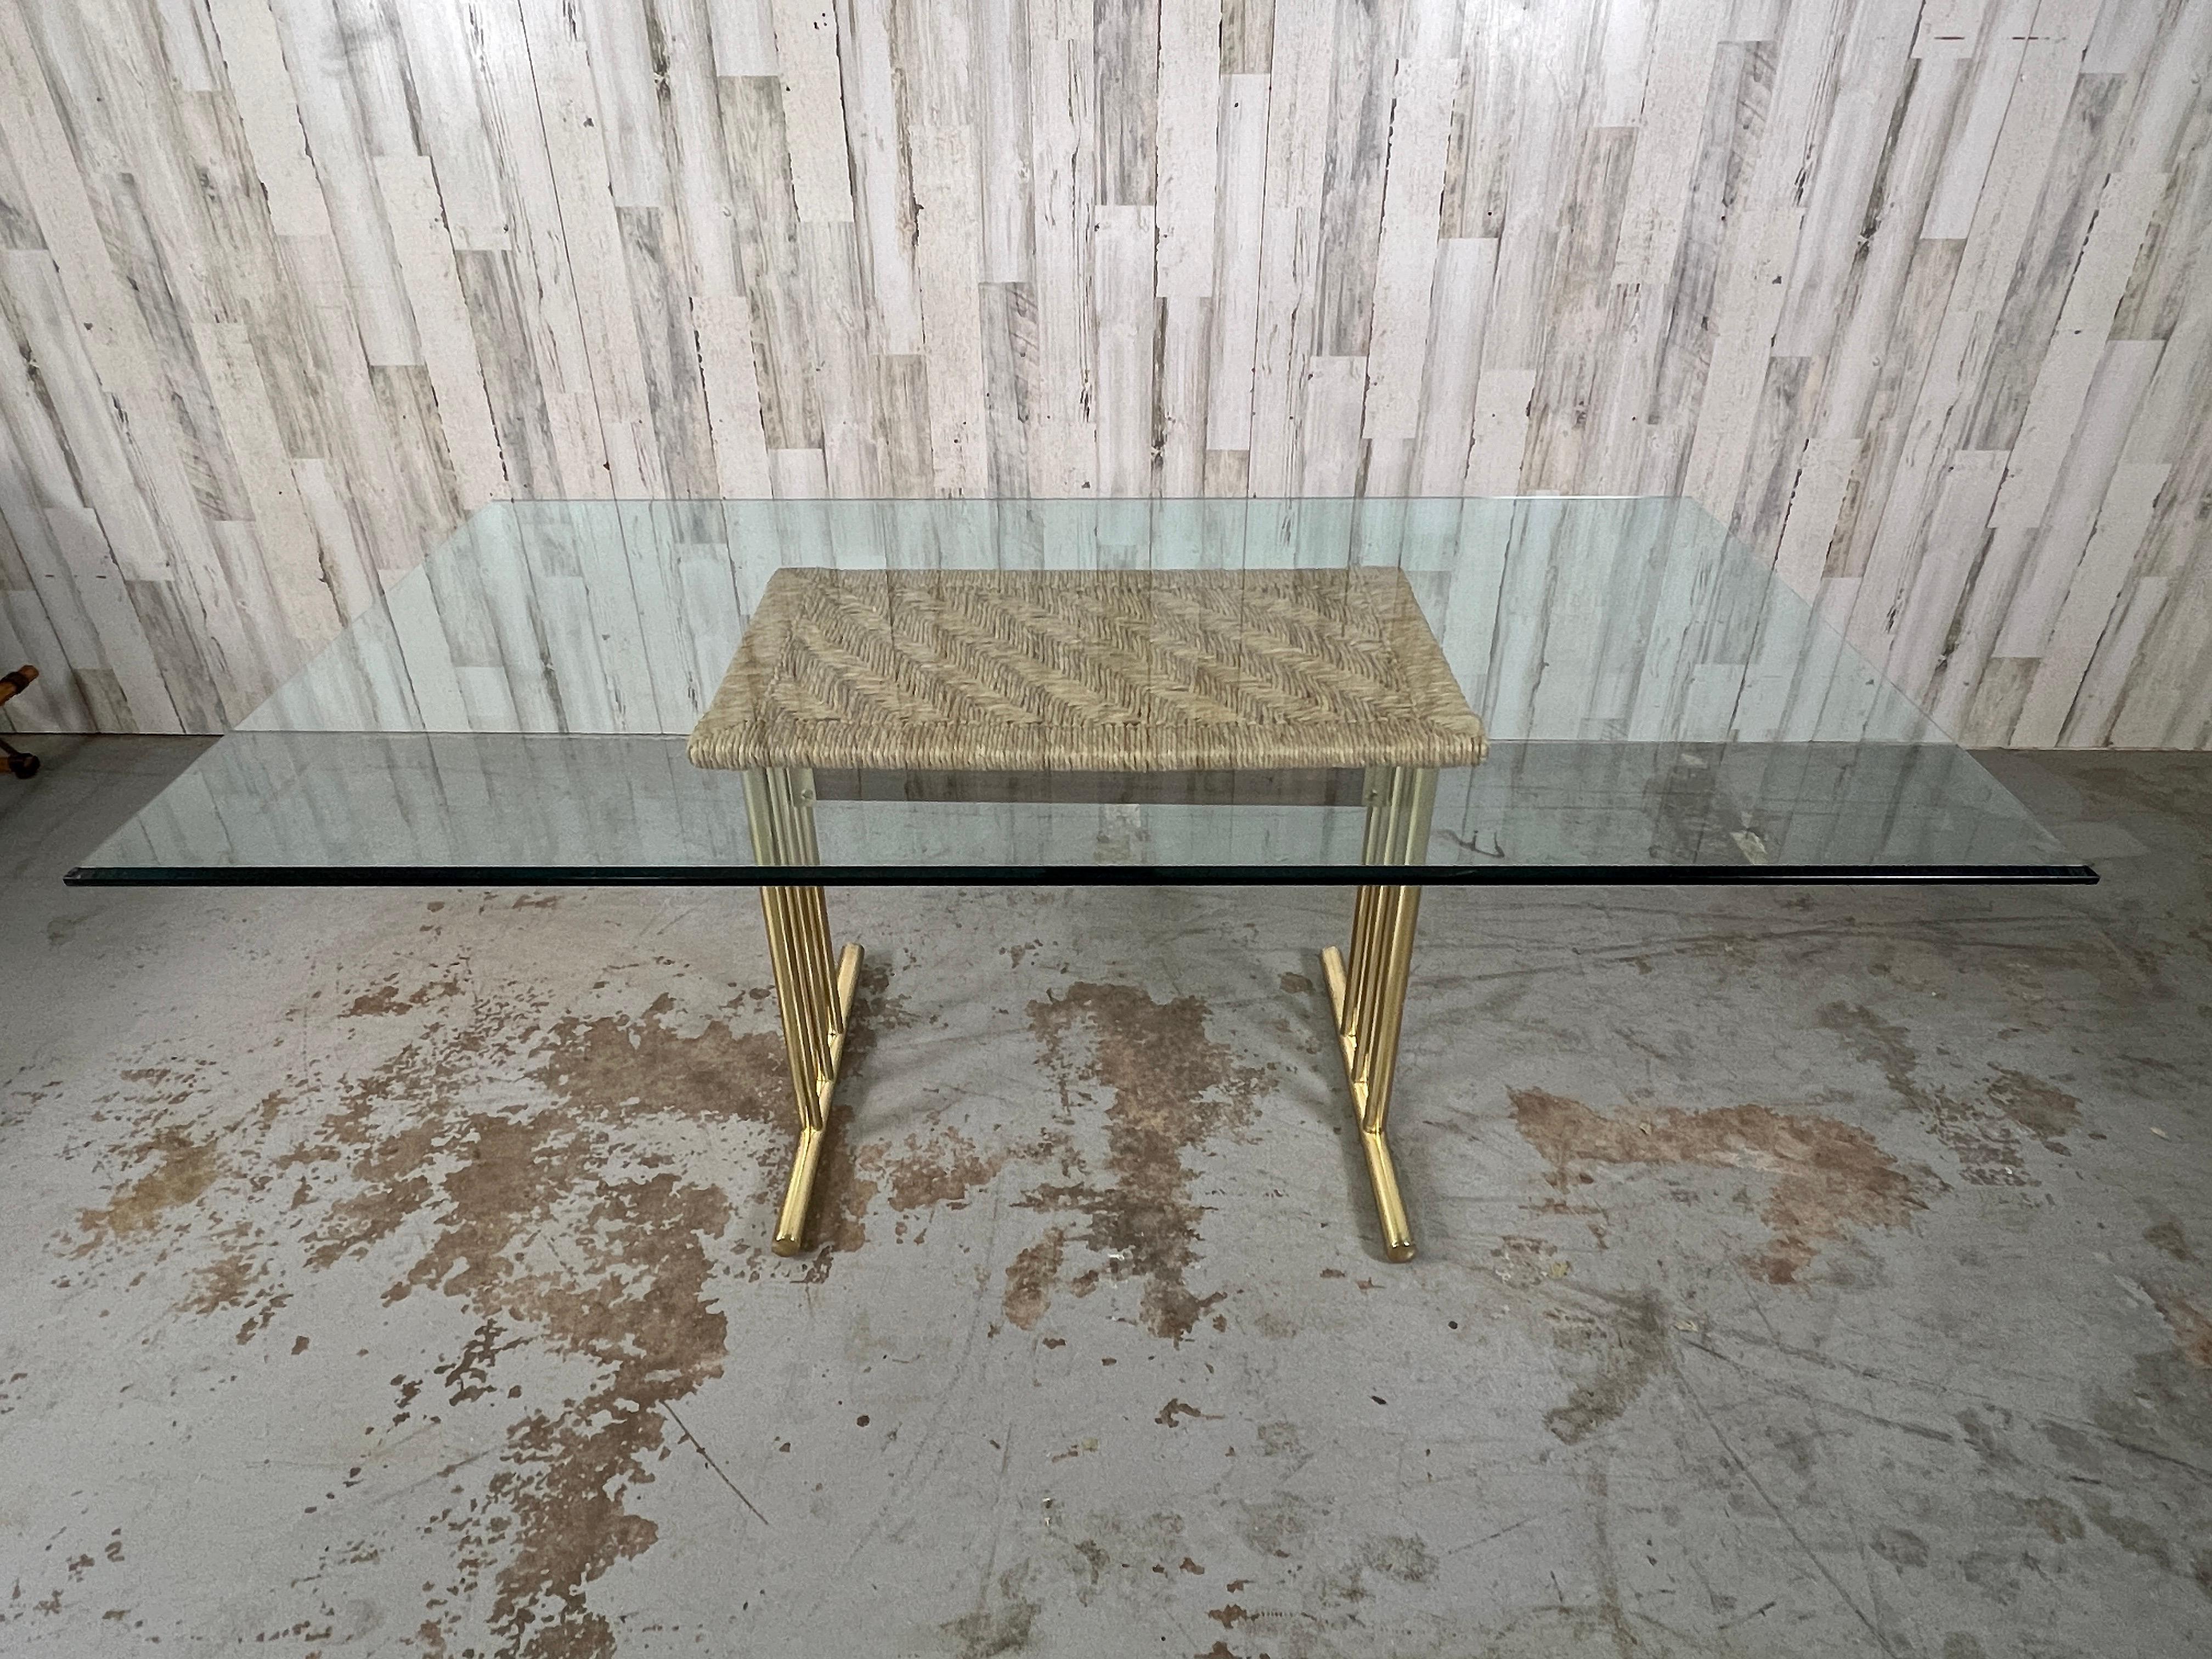 Geometric design woven into the rush top of this Chrome Craft original dining table. The brass trestle style base is a great compliment  to the modern aesthetic.  The glass top is optional.
Base measures: 19 3/4